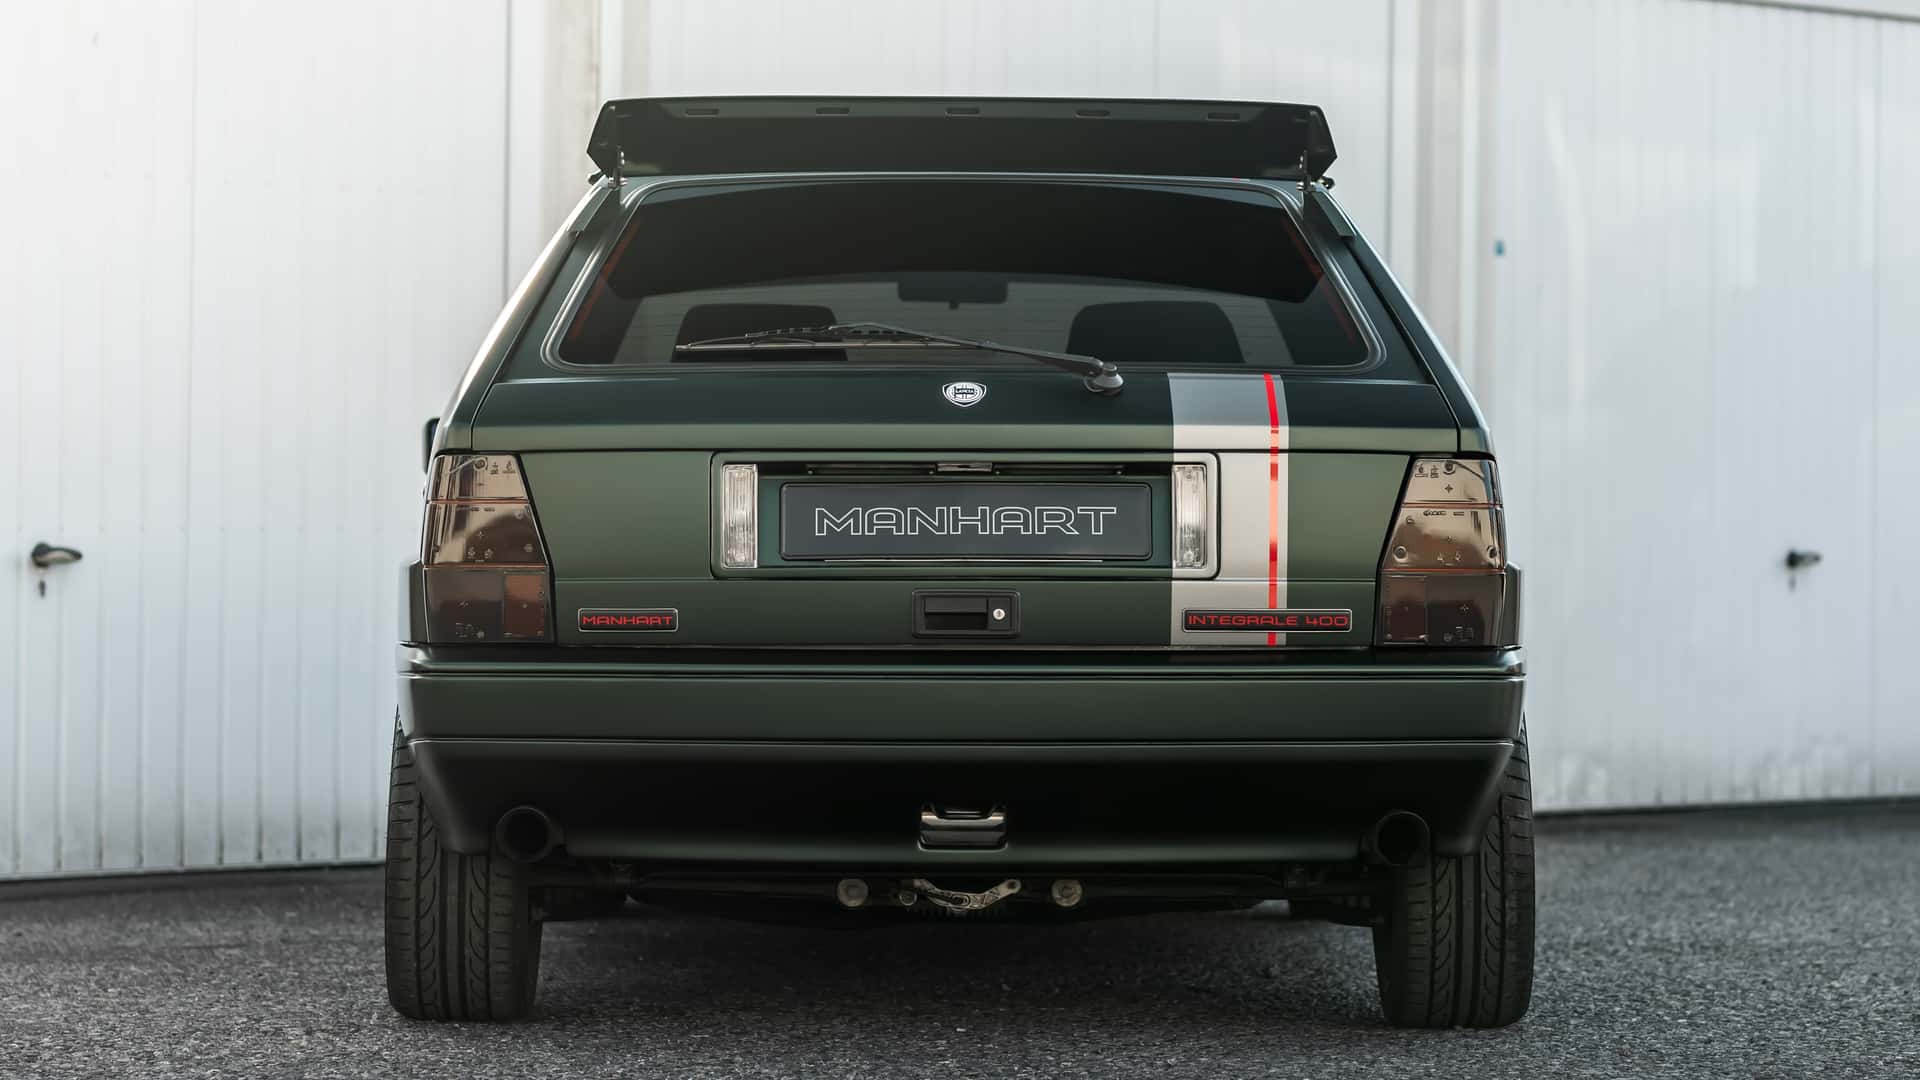 manhart tuned the hell out of the lancia delta integrale 6